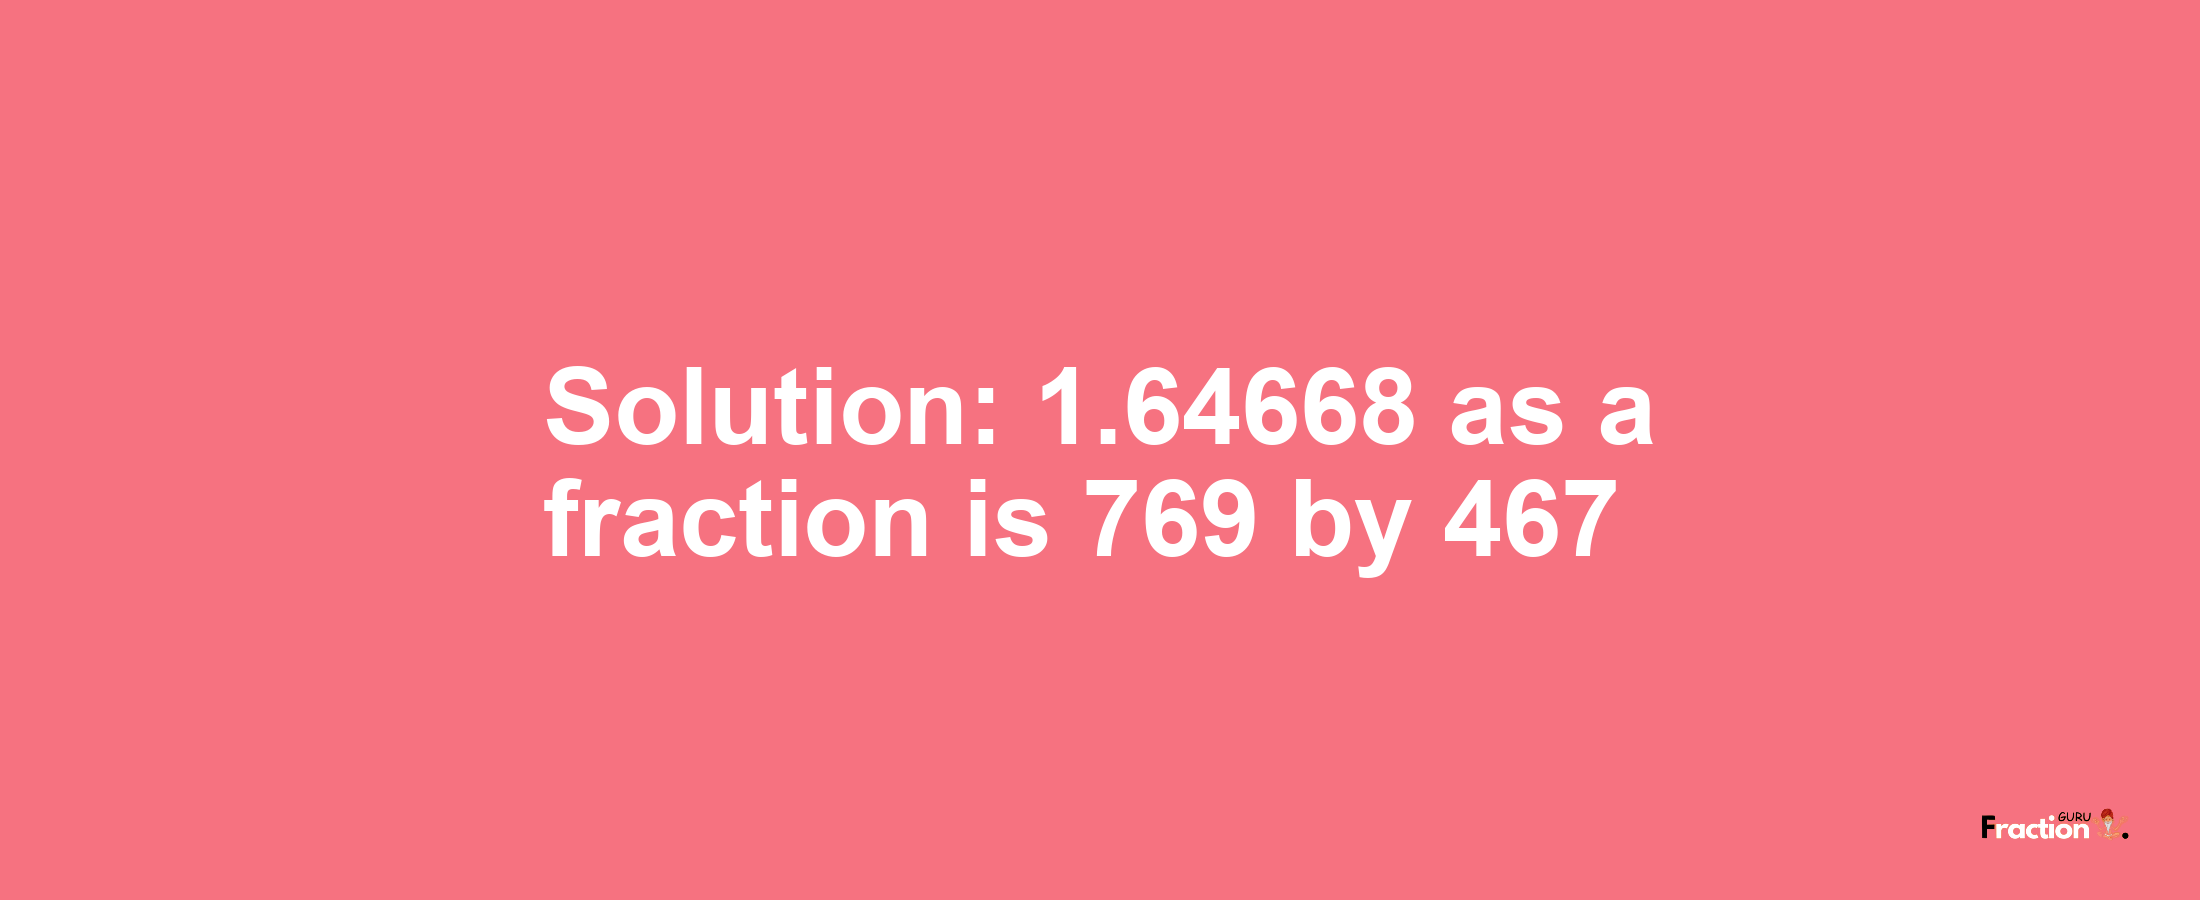 Solution:1.64668 as a fraction is 769/467